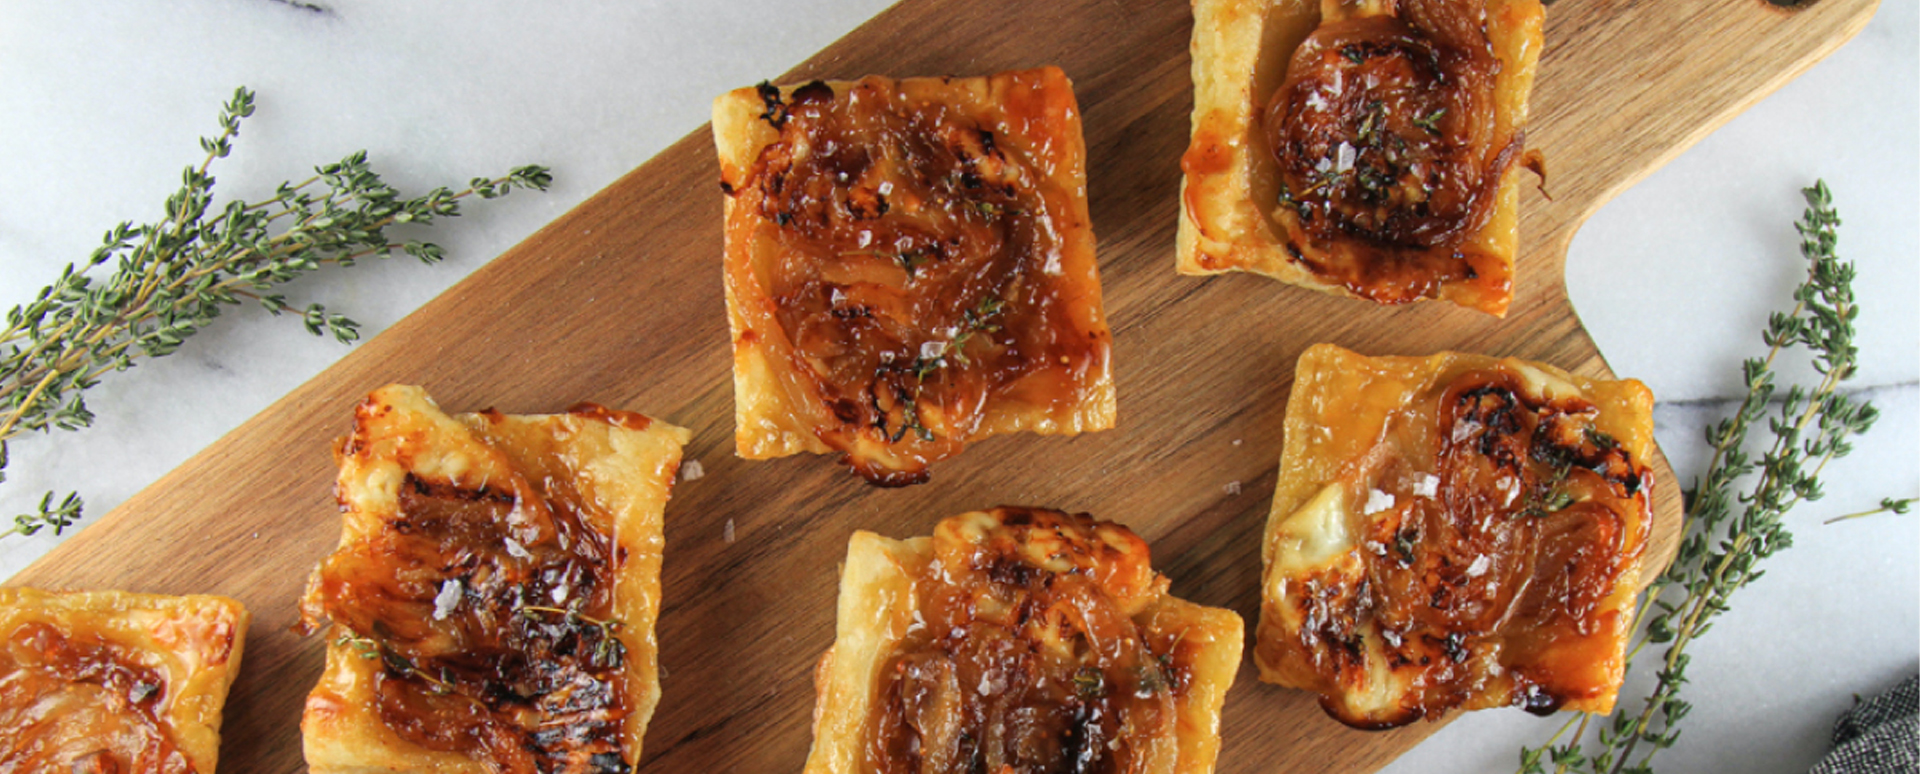 Upside Down Tarts with Onion, Brie, Fig Jam and Thyme